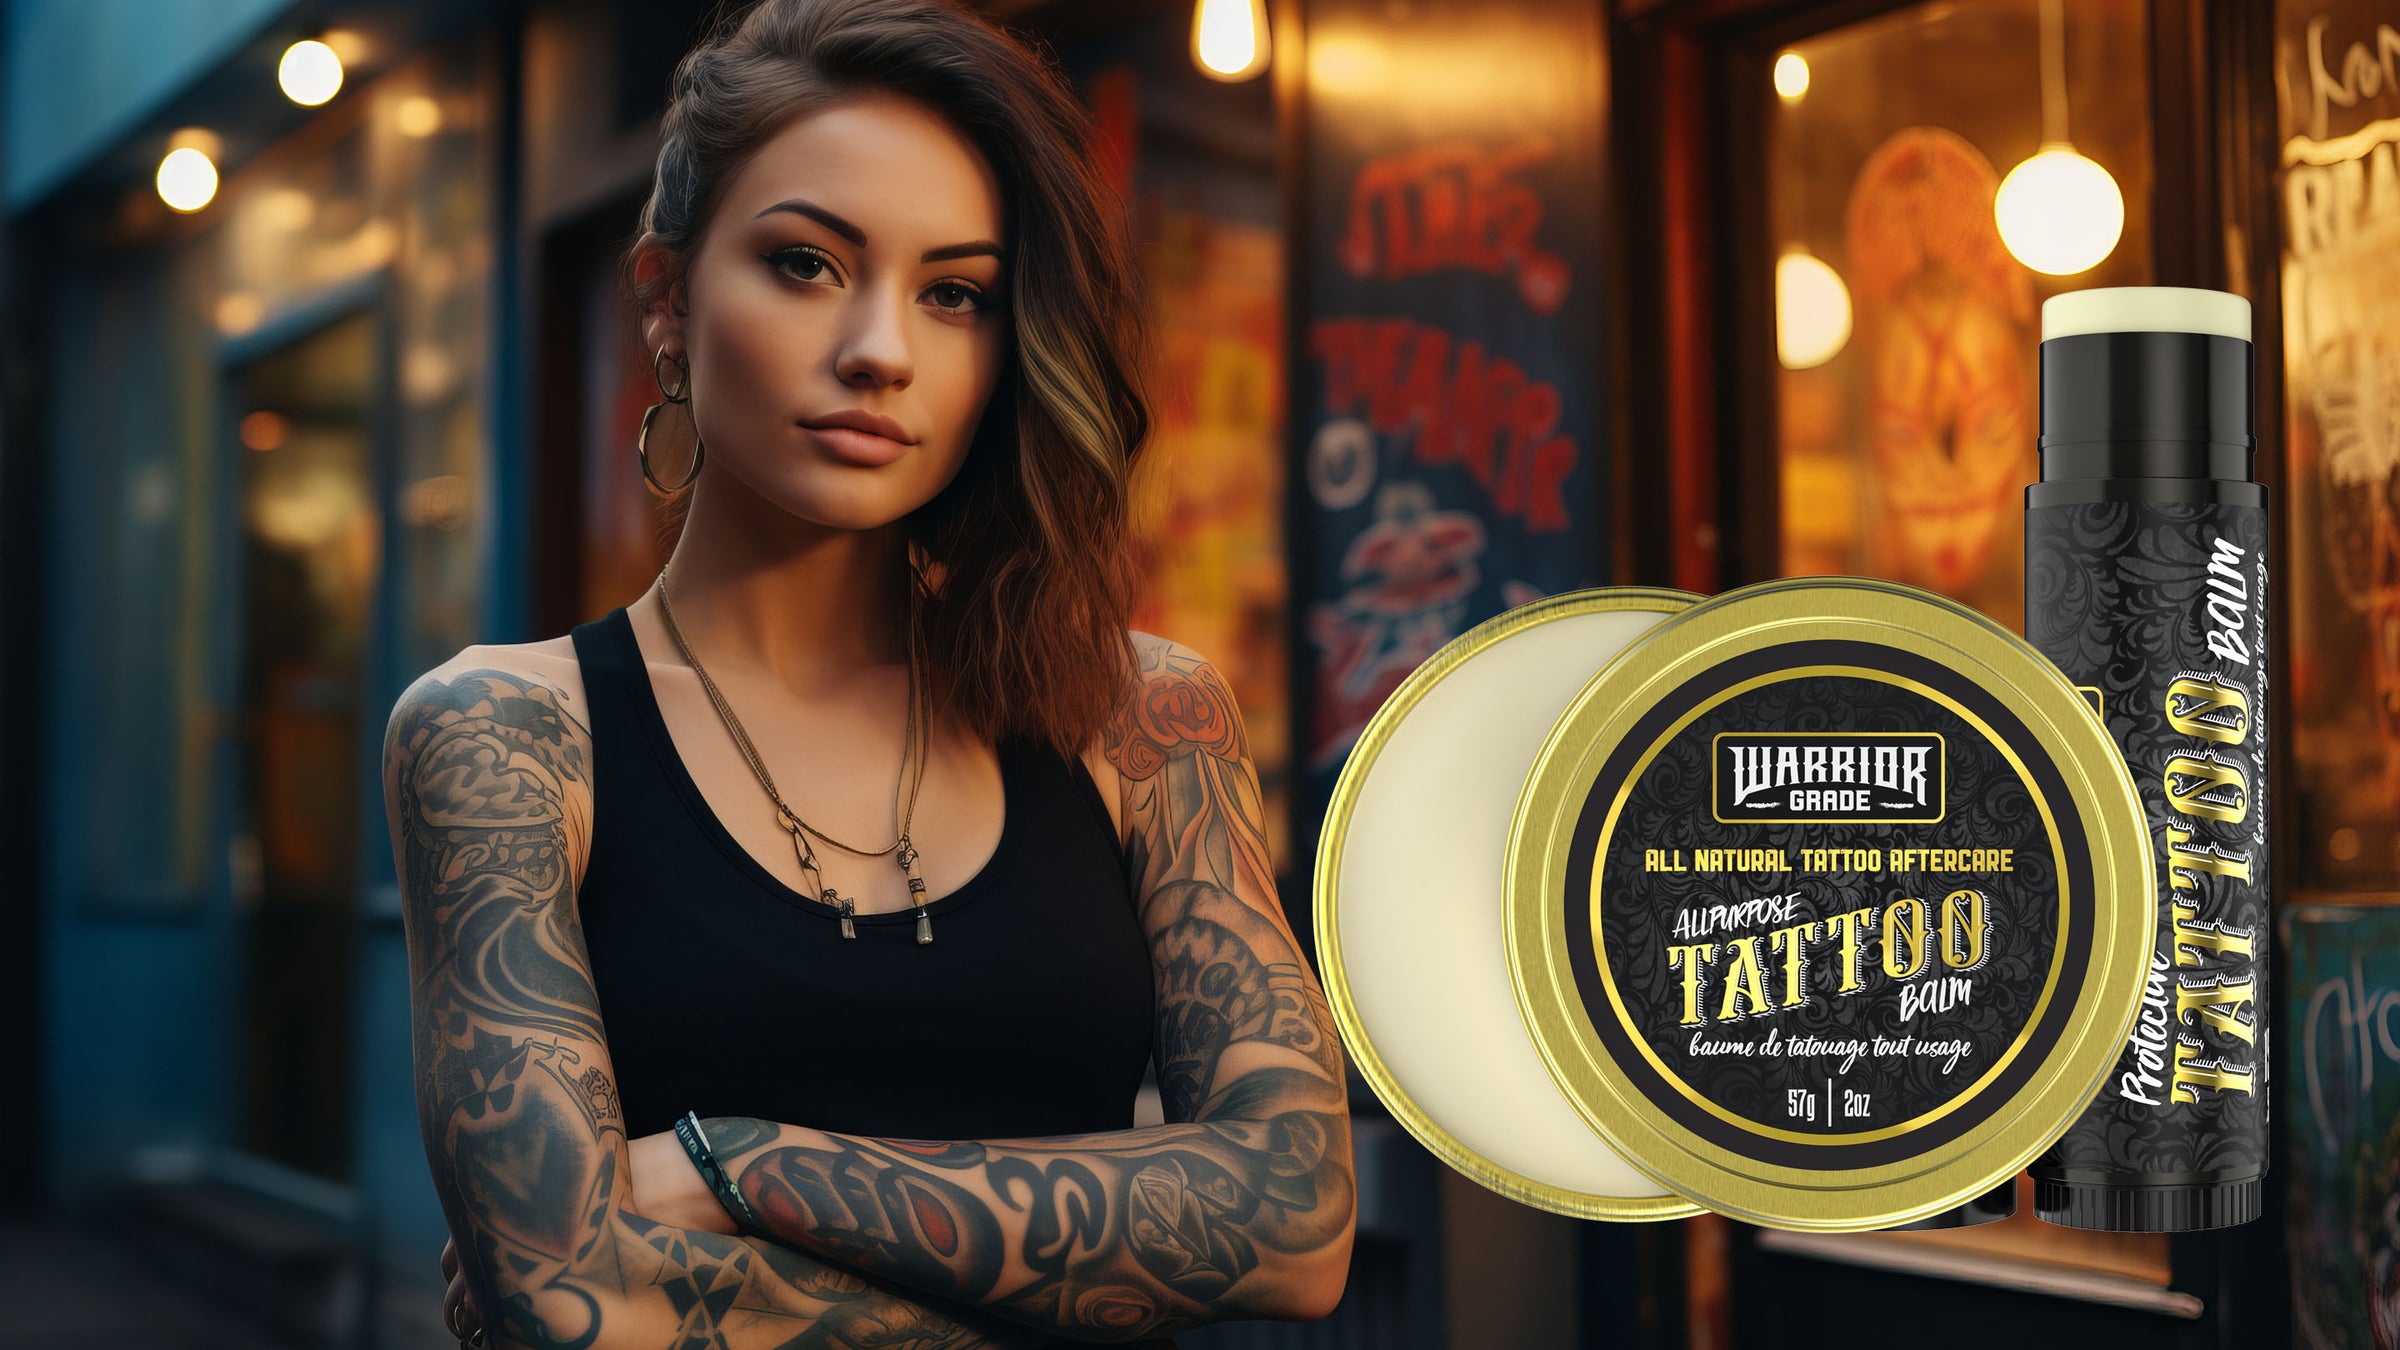 Beautiful tattooed woman with her arms crossed in neon lighting outside a tattoo shop. Marketing images of Valhalla Legends tattoo balm on the side